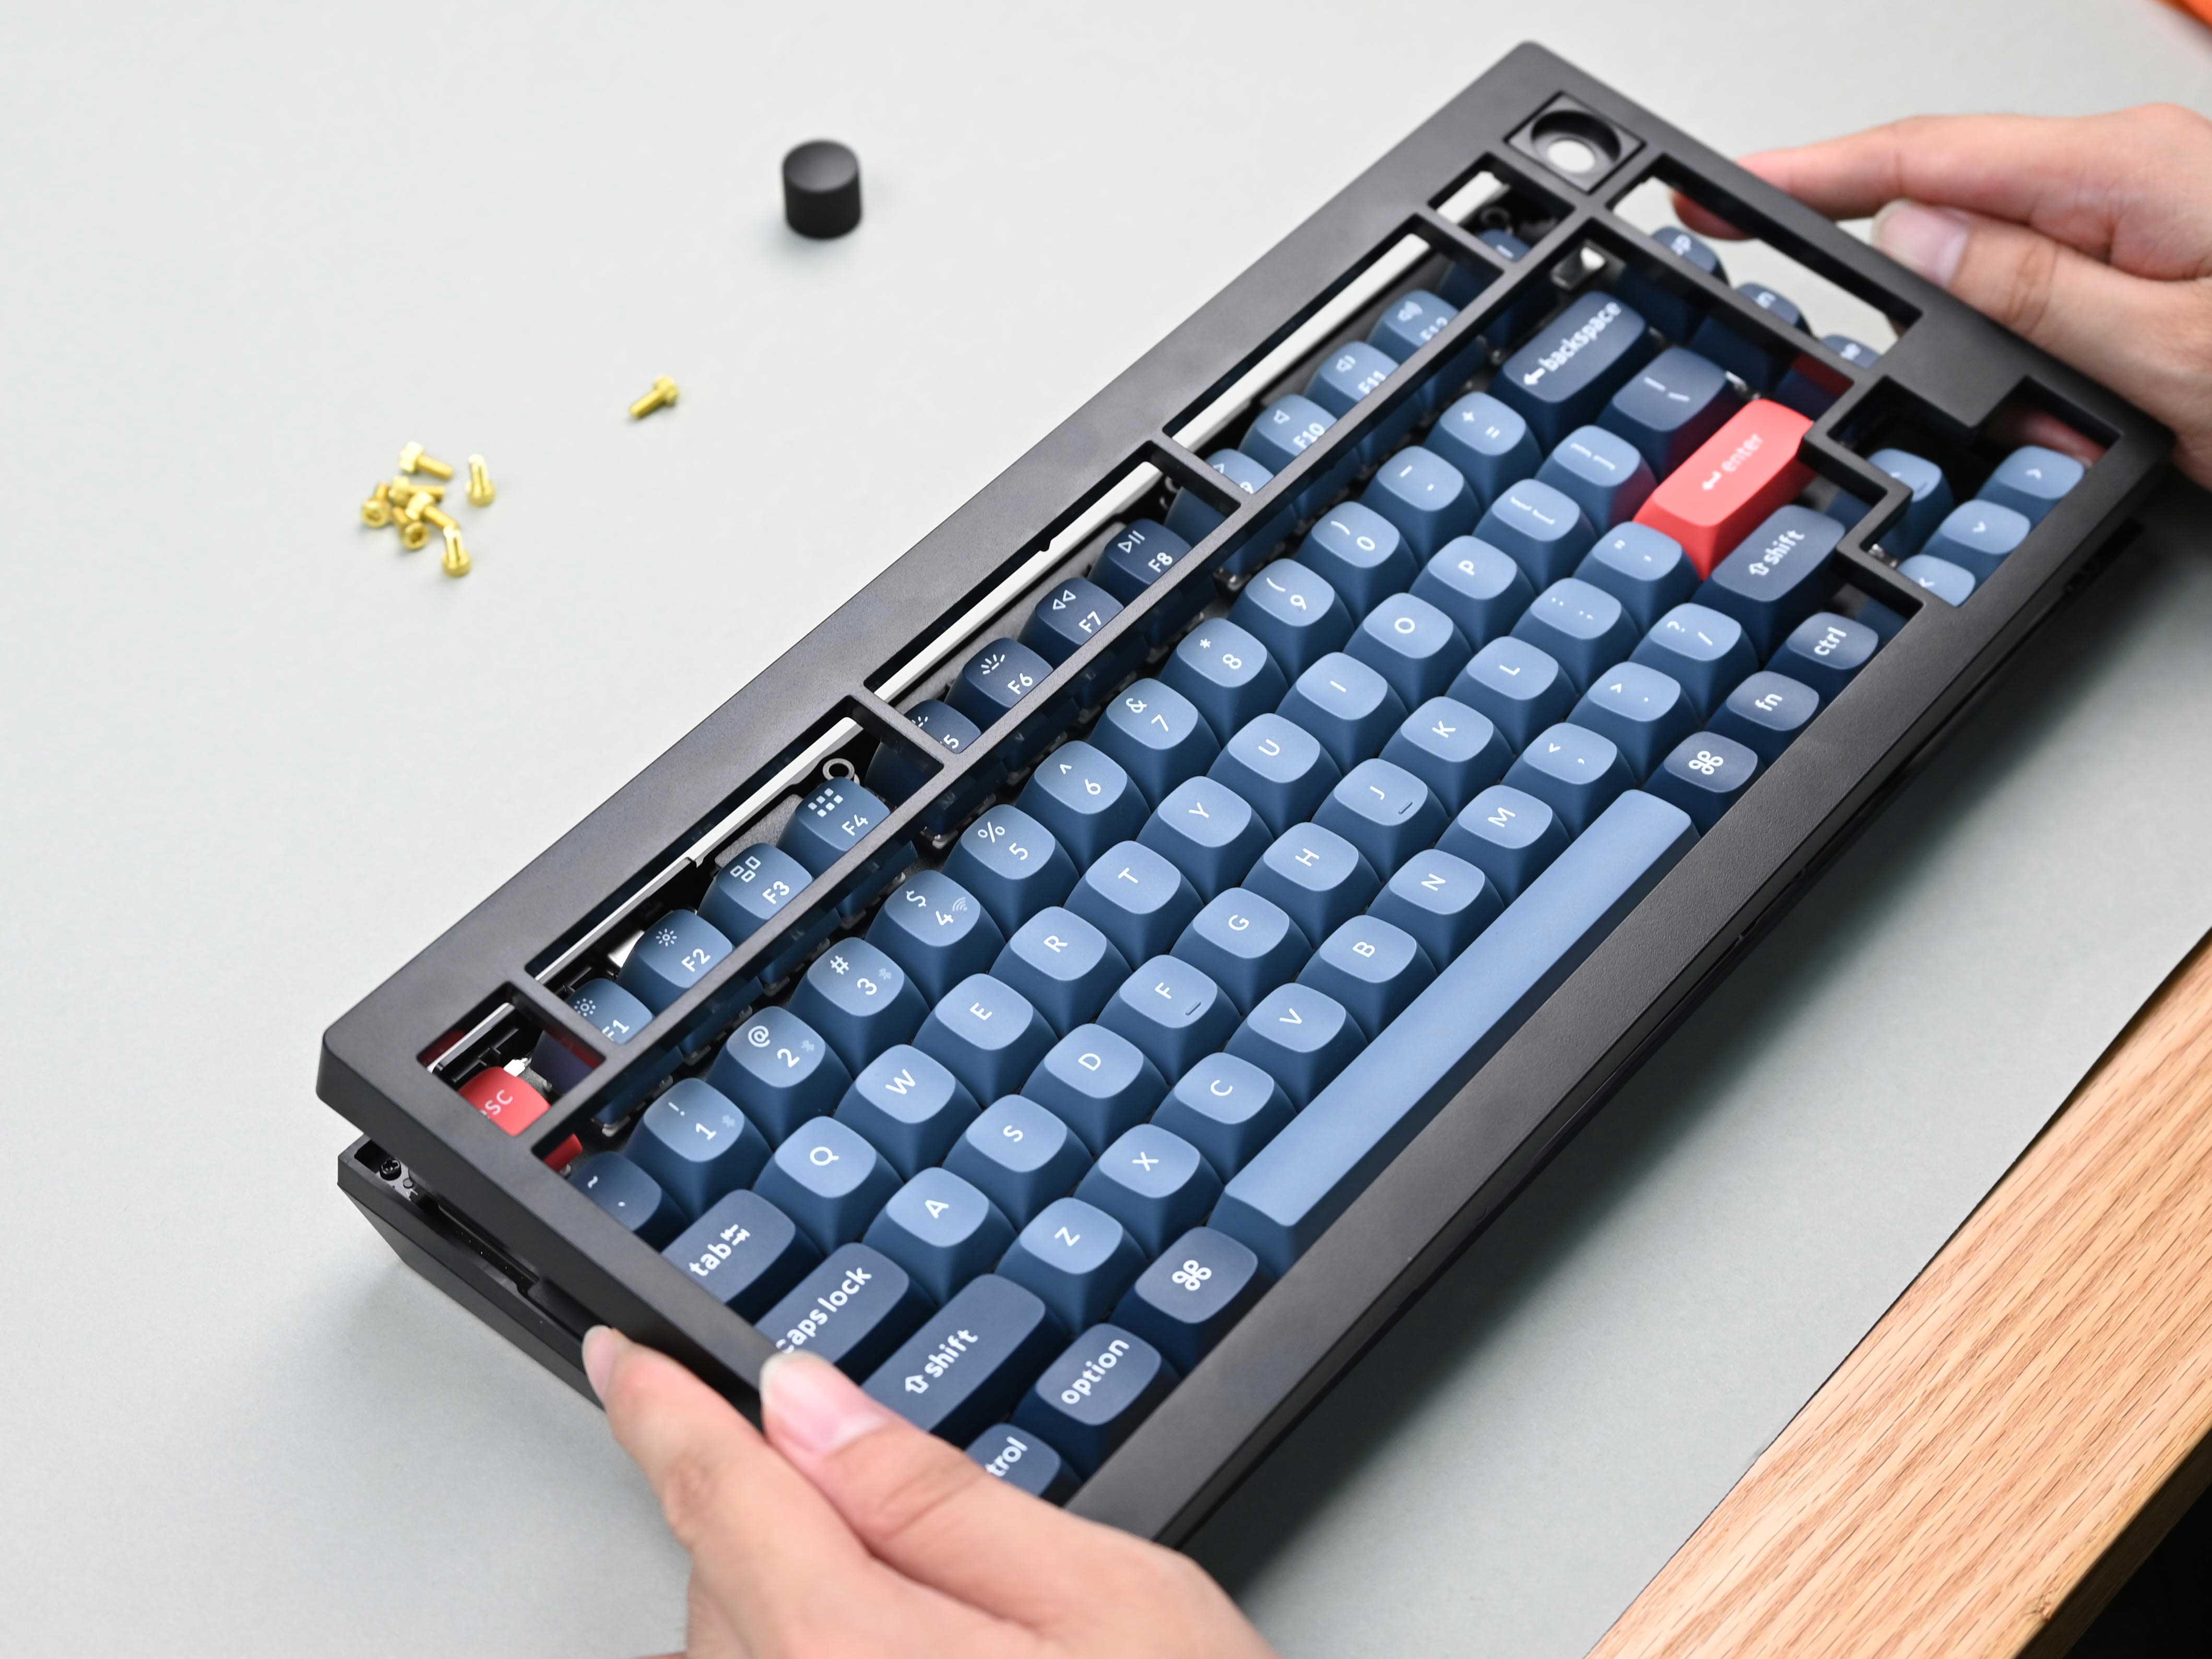 Using the hex key, unscrew the screws from the back of the keyboard 